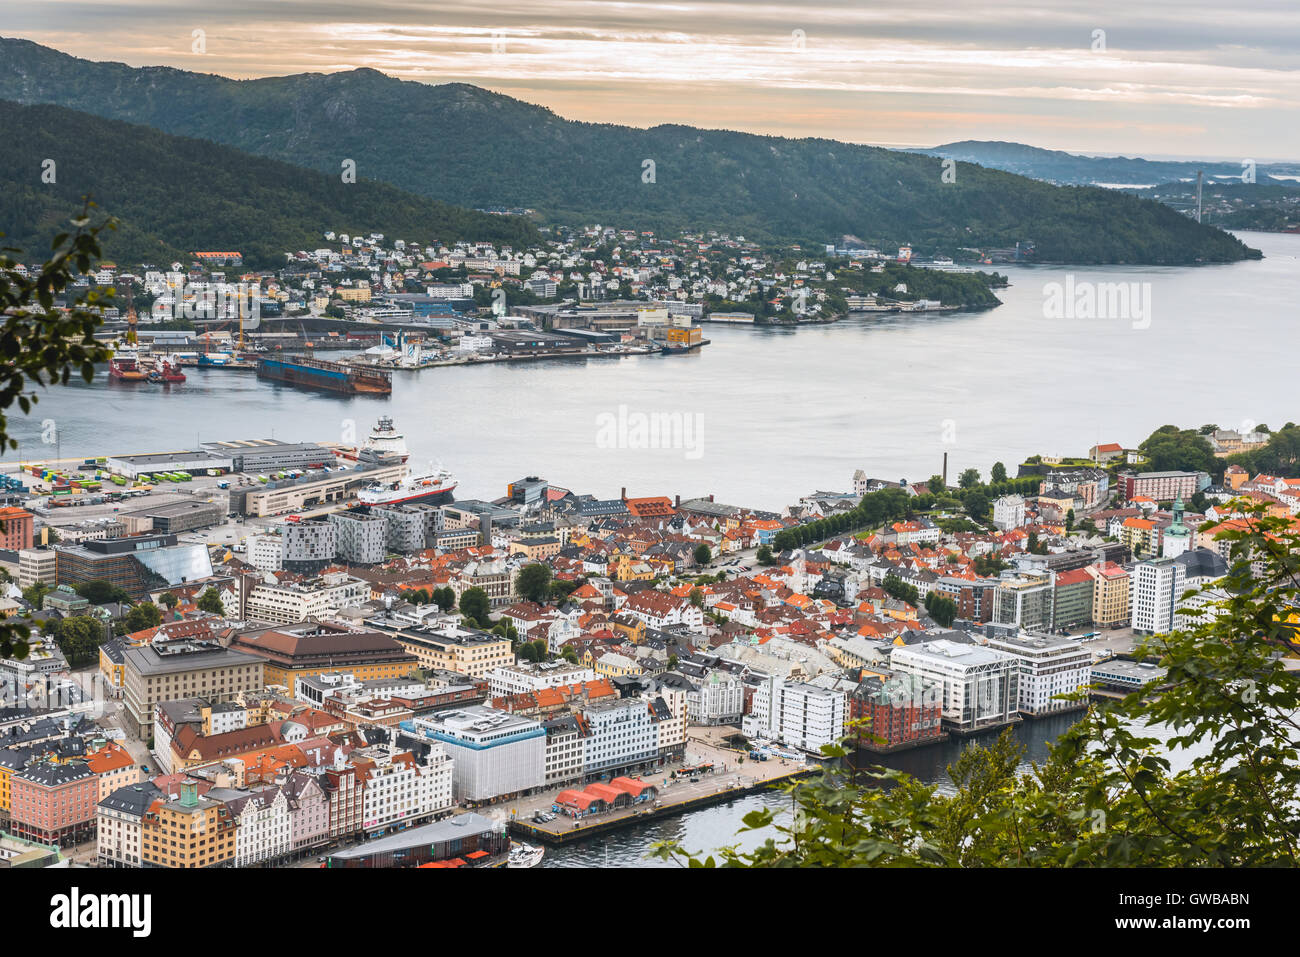 Aerial view of colorful city Bergen, Norway Stock Photo